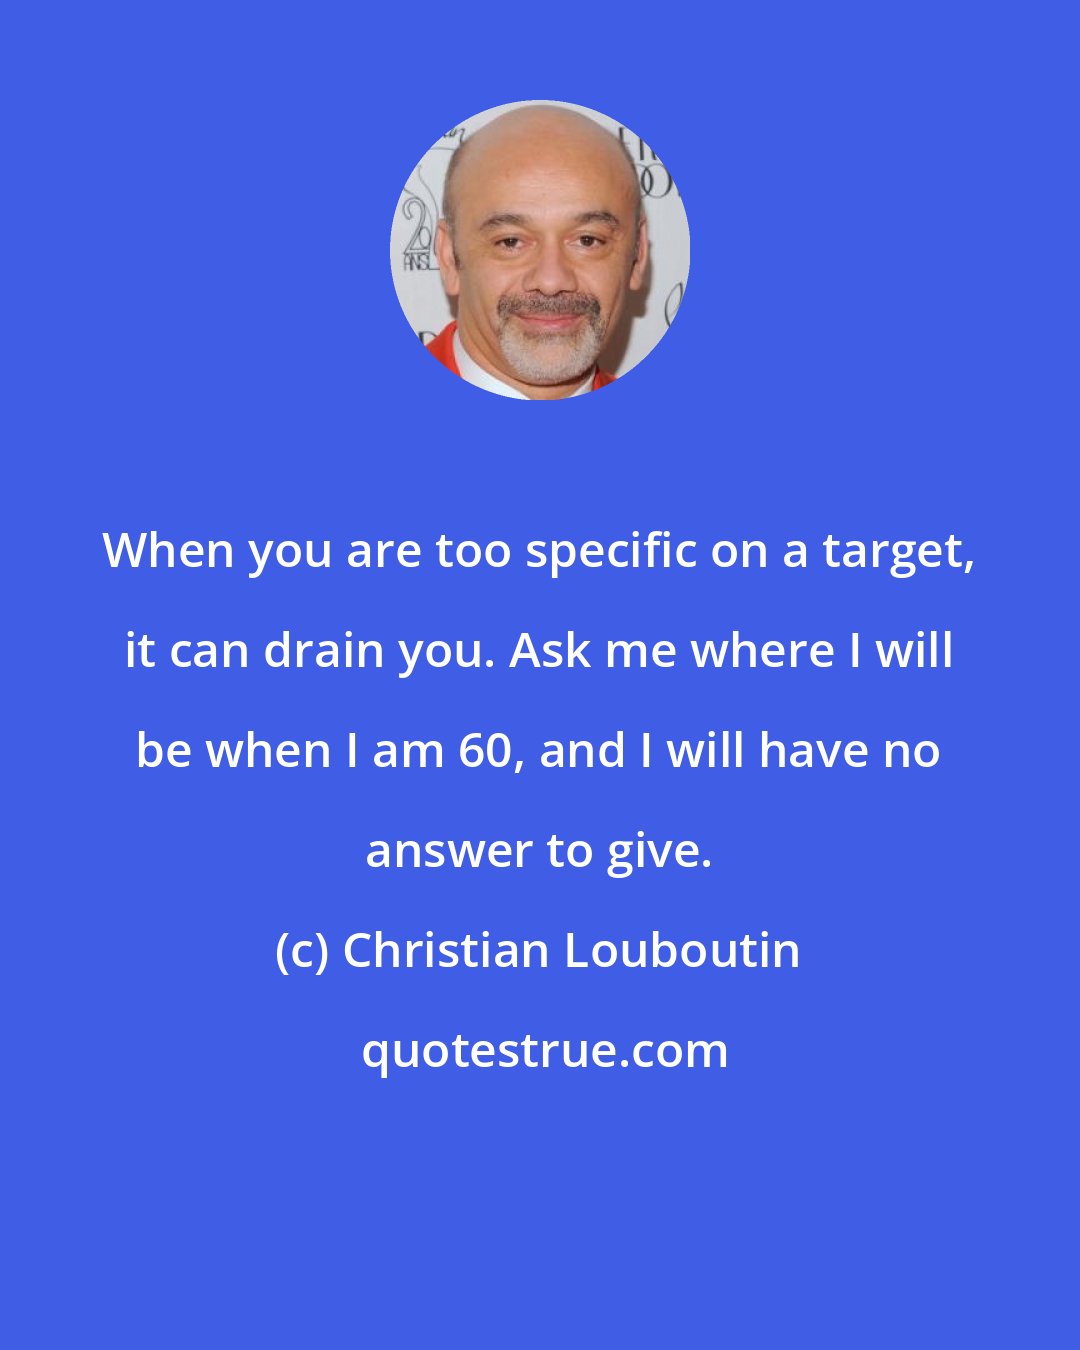 Christian Louboutin: When you are too specific on a target, it can drain you. Ask me where I will be when I am 60, and I will have no answer to give.